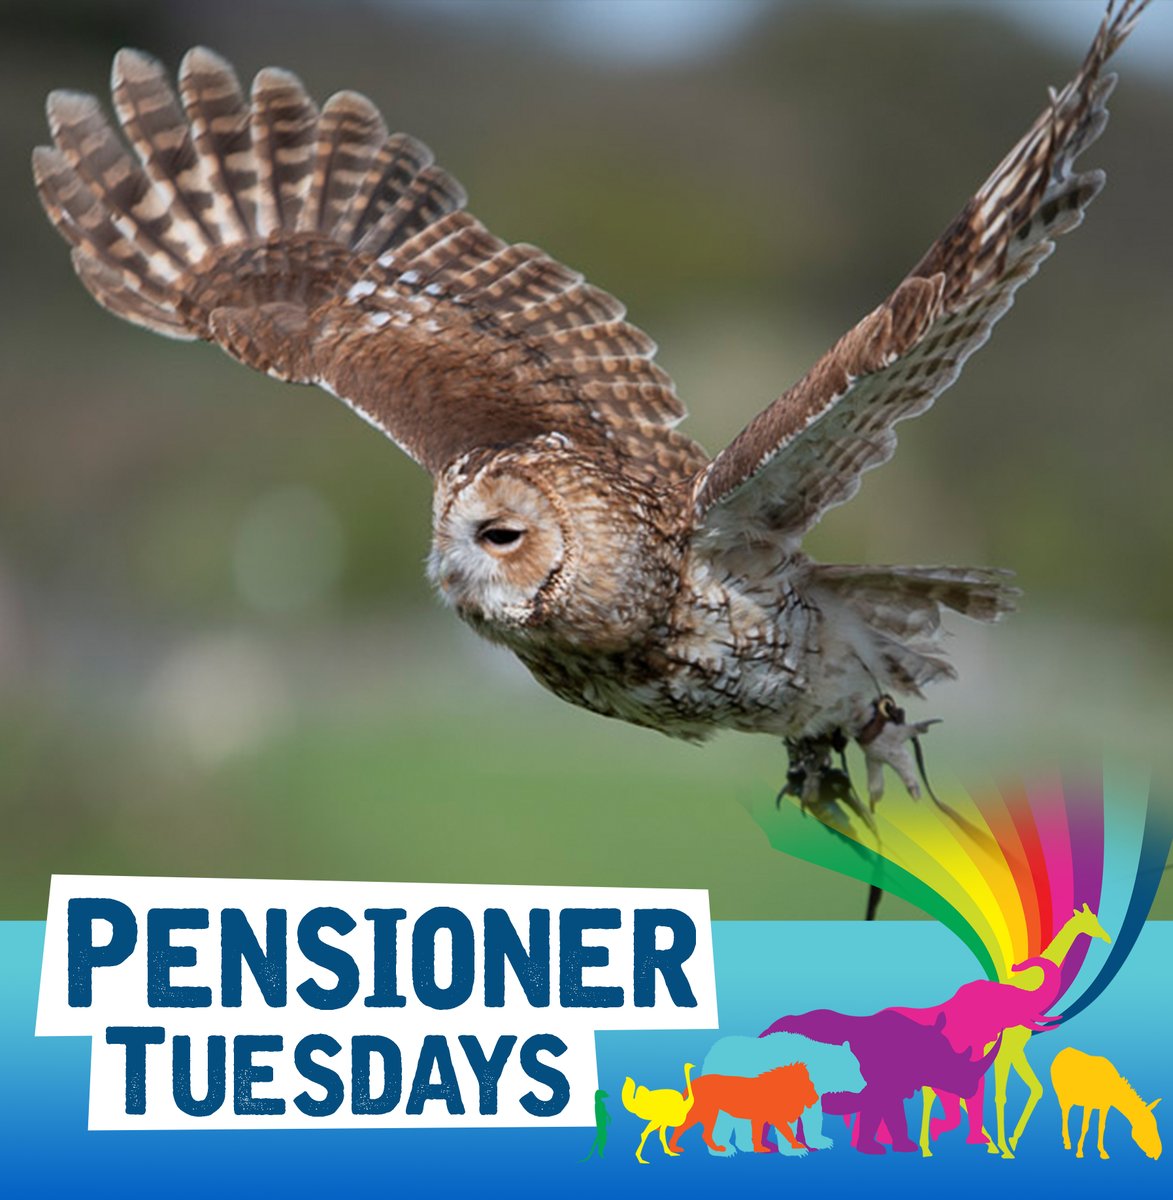 We are thrilled to announce that our highly requested Pensioners Tuesday offering is back...for good! Pensioners aged 65+ are invited into the Zoo on Tuesdays for a special discounted rate of £10! Simply ask for a Pensioner Tuesday ticket when arriving at the Zoo on a Tuesday.